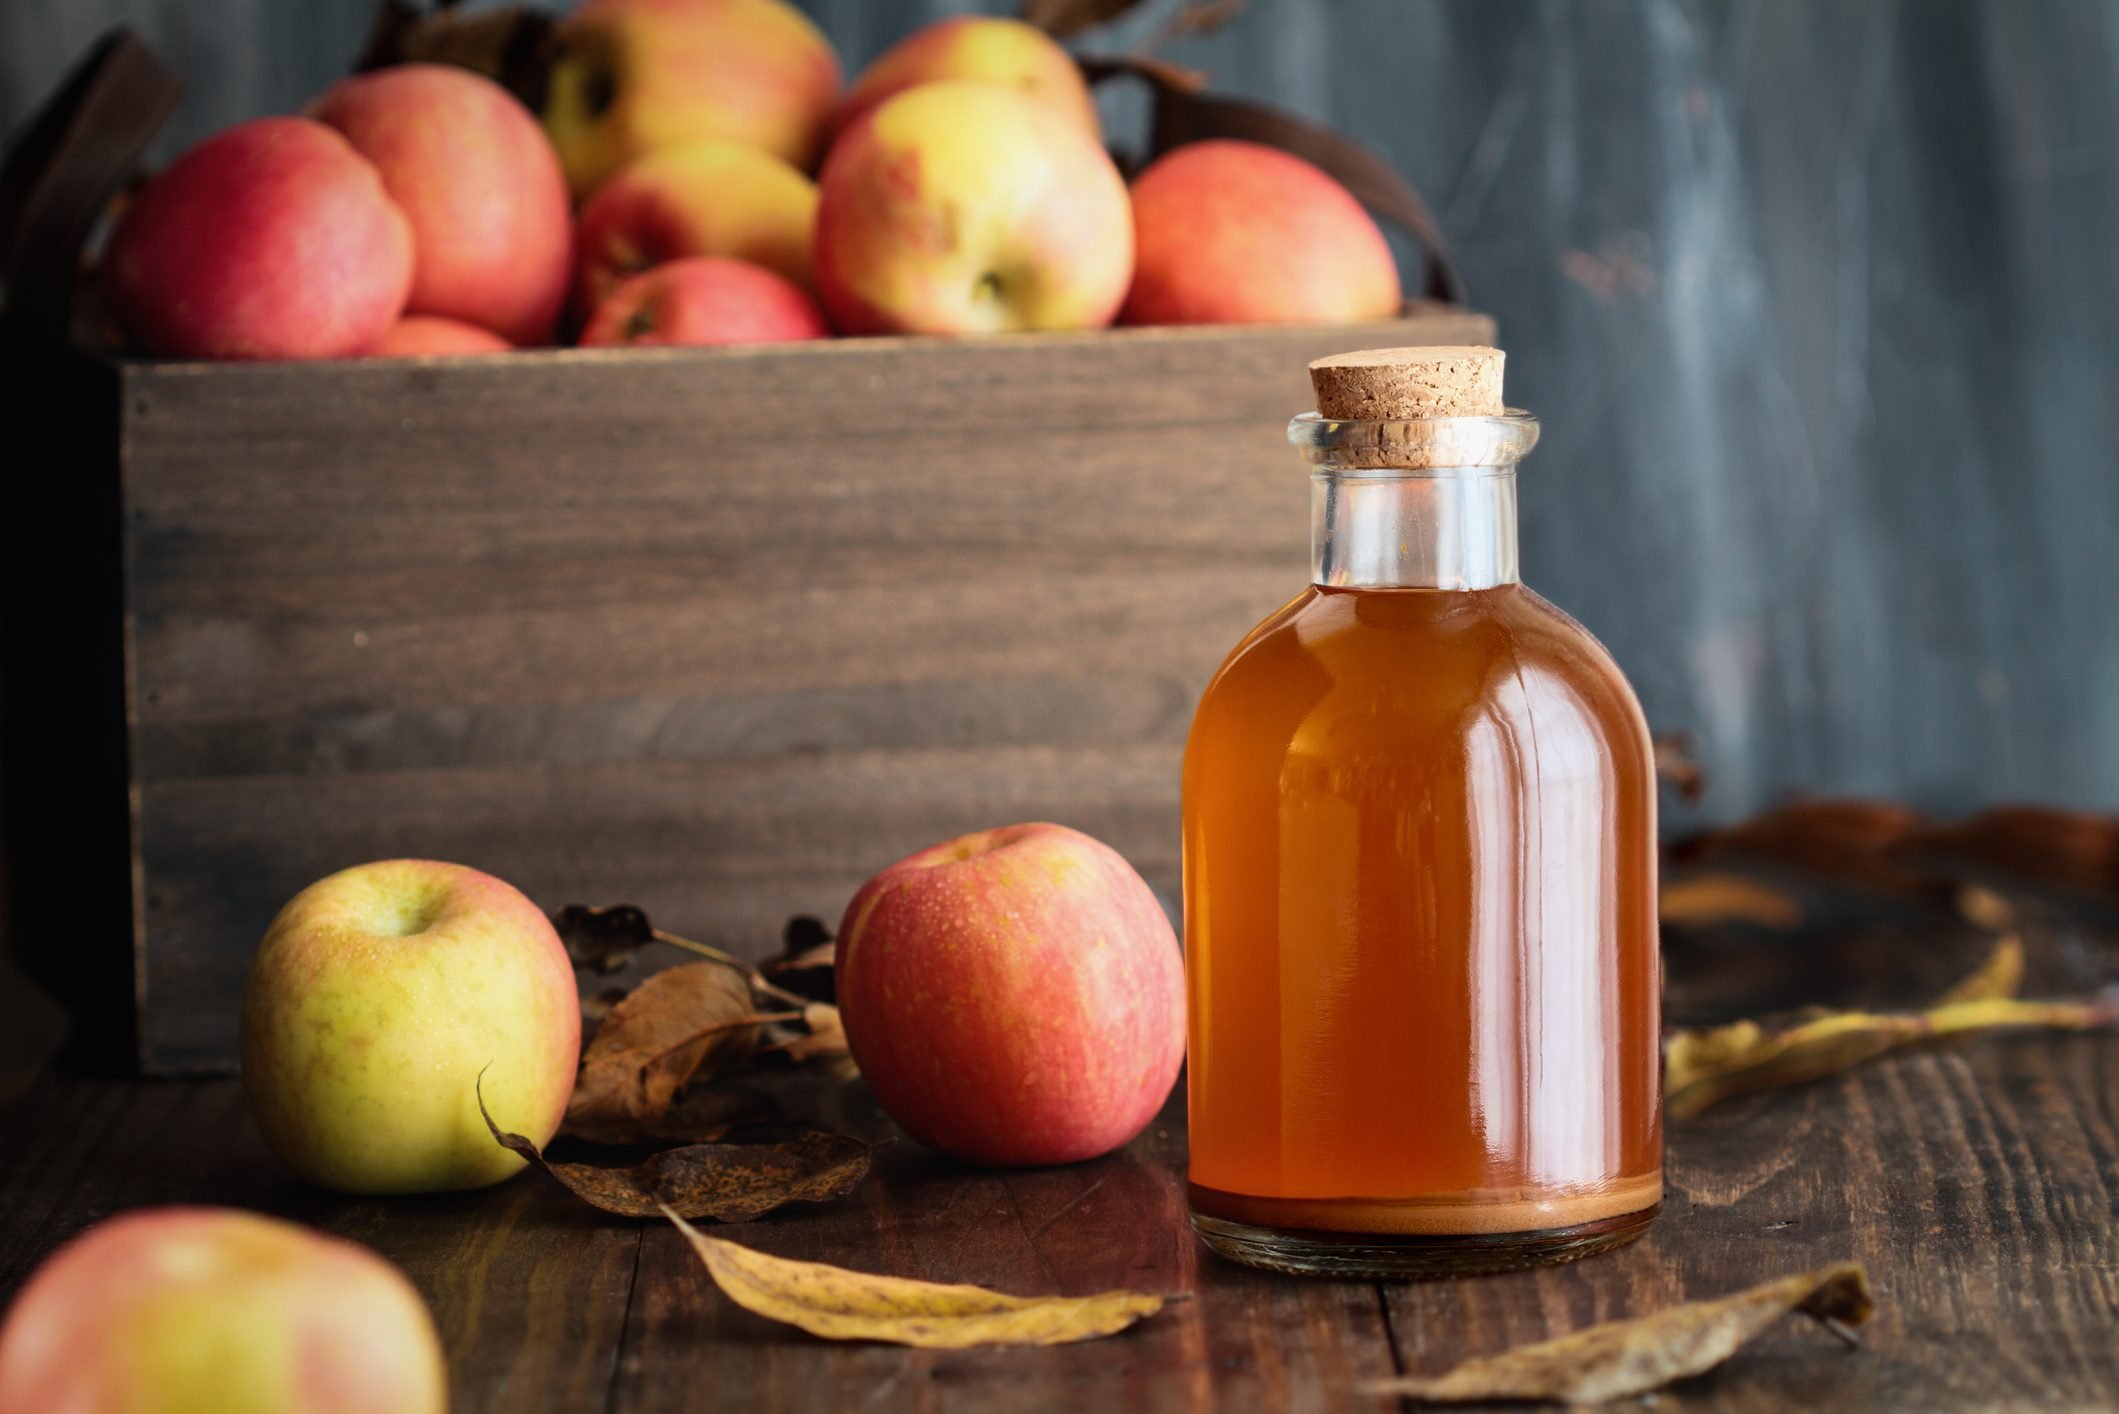 Can You Drink Apple Cider Vinegar While Fasting?